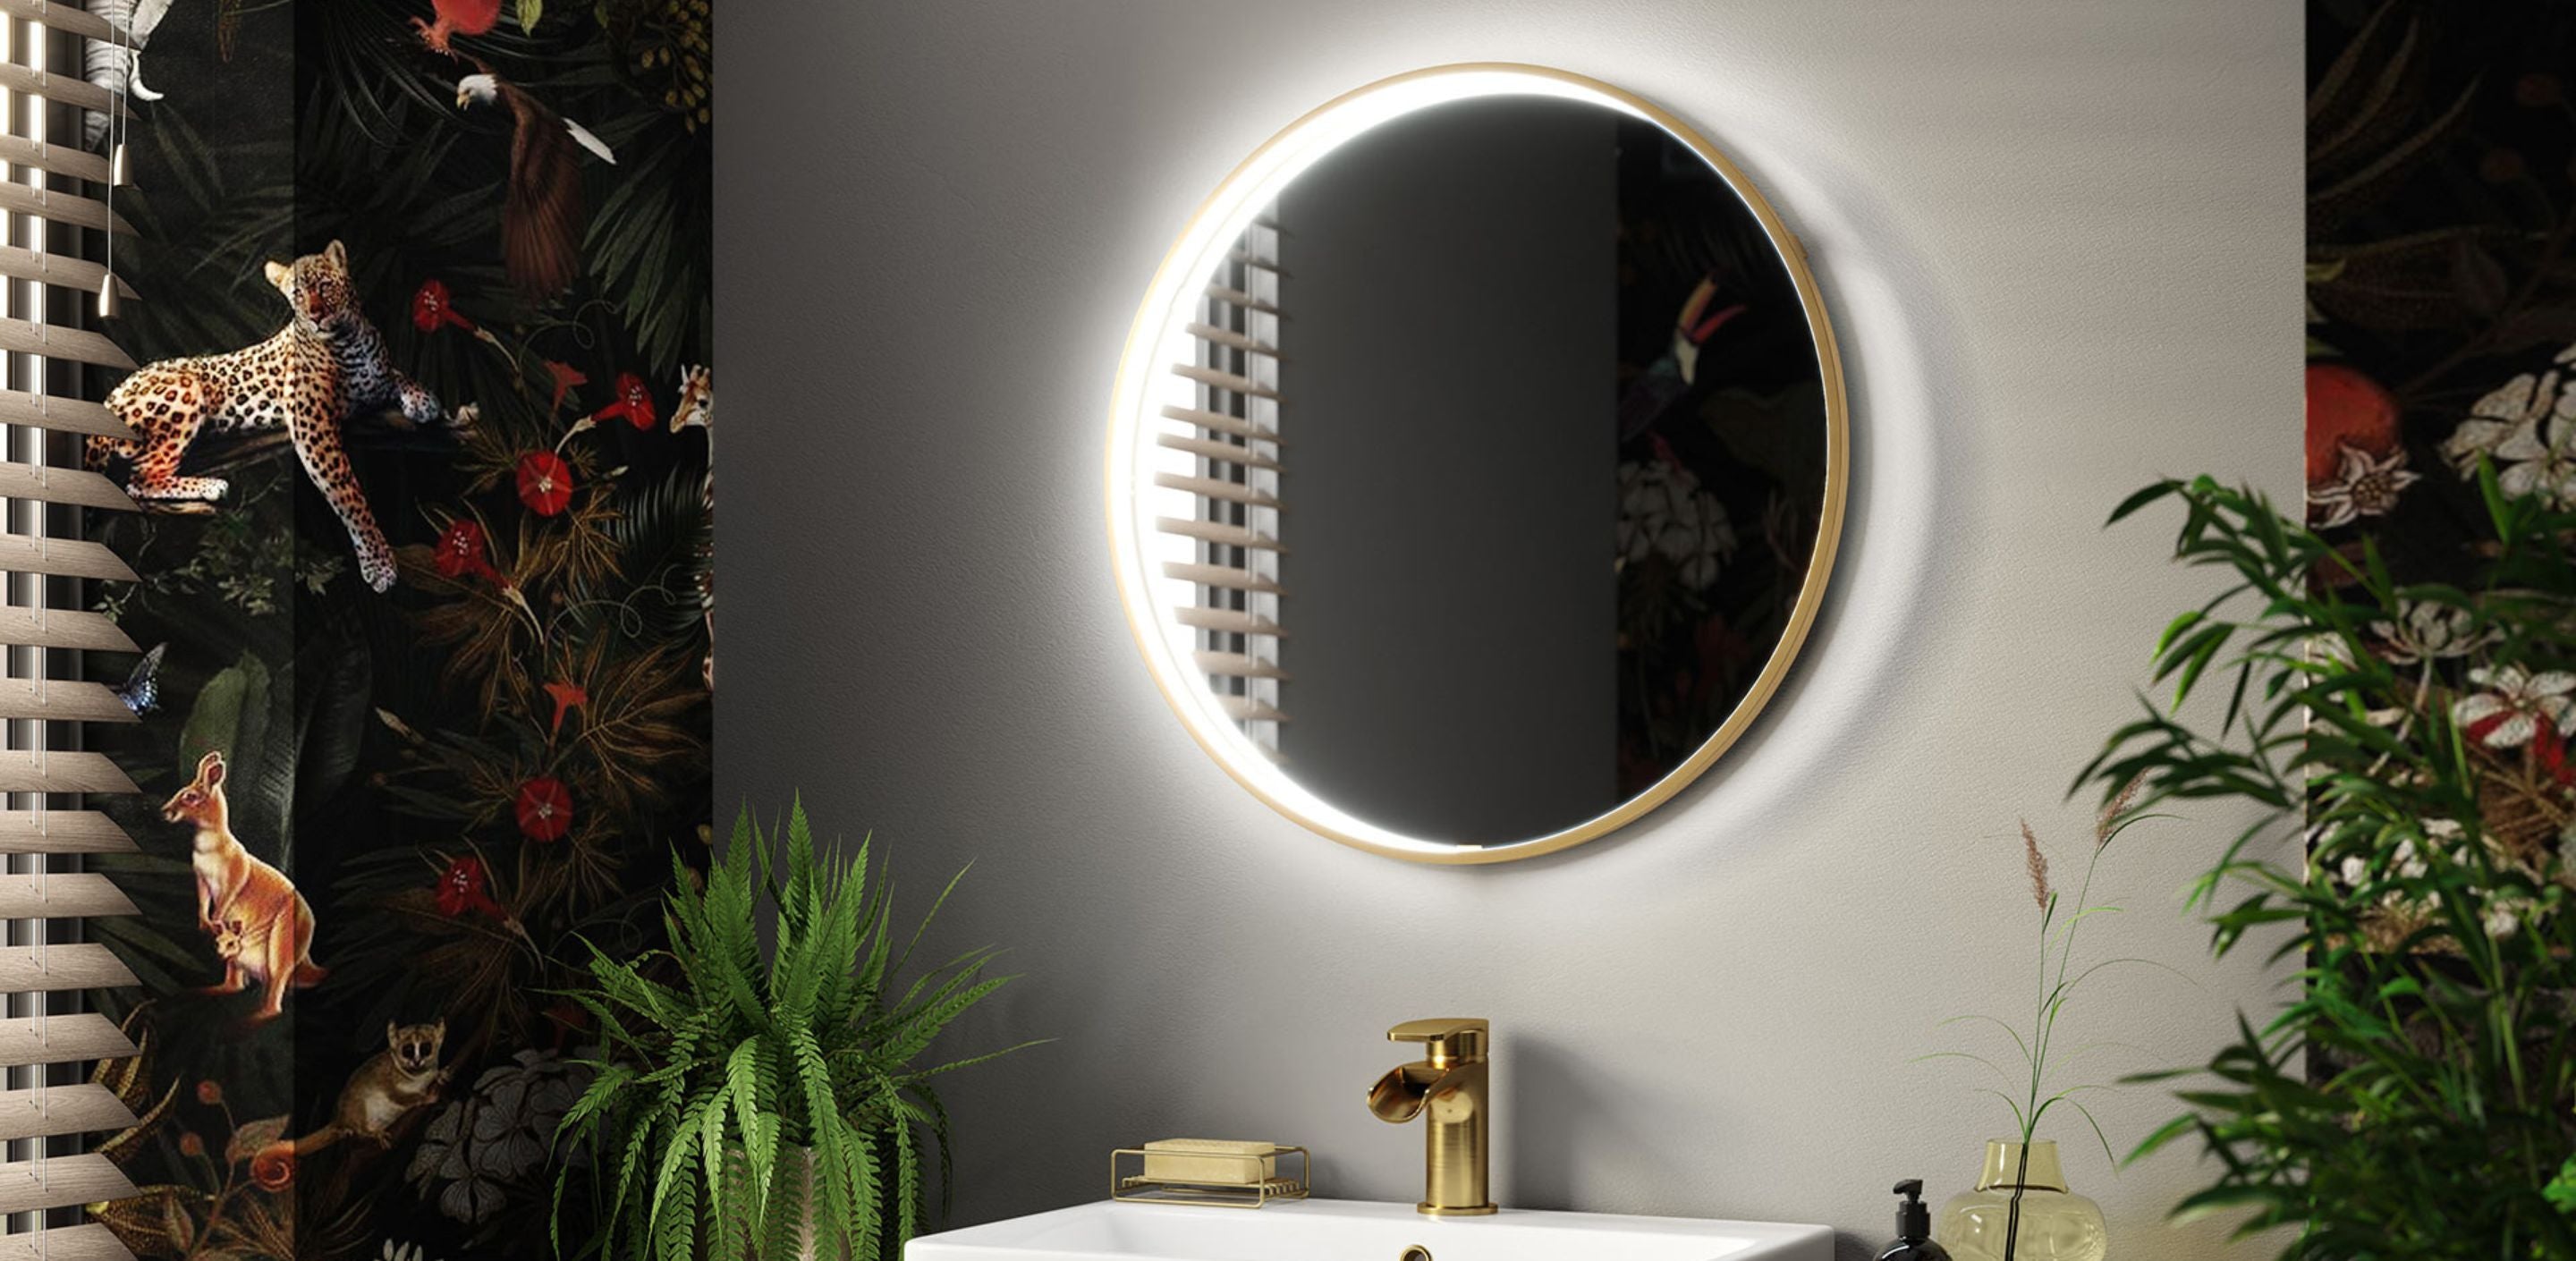 How to find the right mirror size for your bathroom